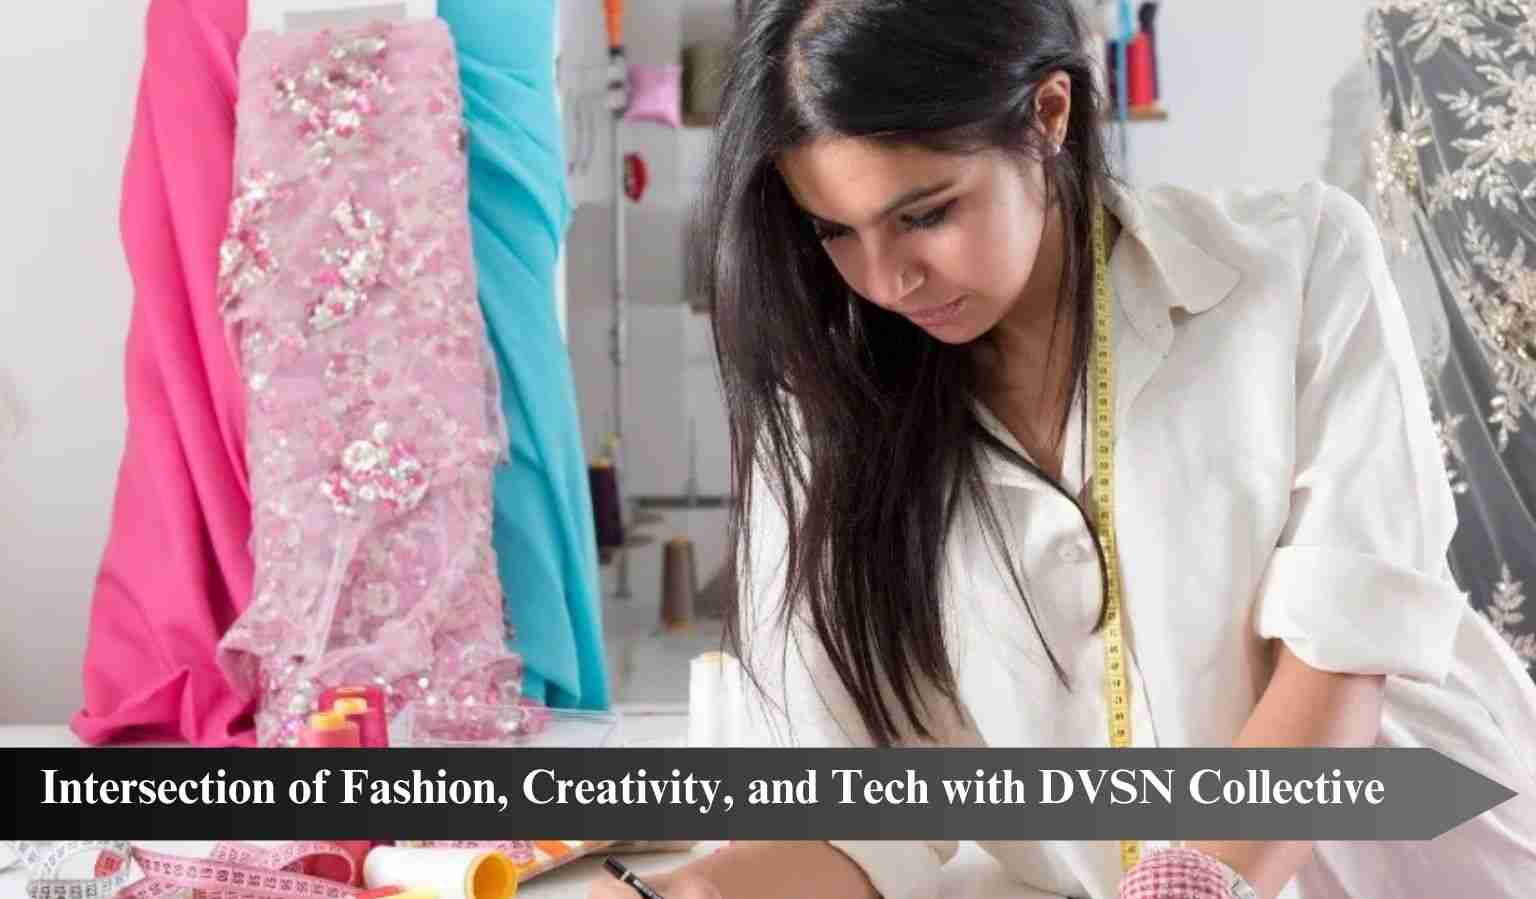 Unleashing Innovation – The Intersection of Fashion, Creativity, and Tech with DVSN Collective